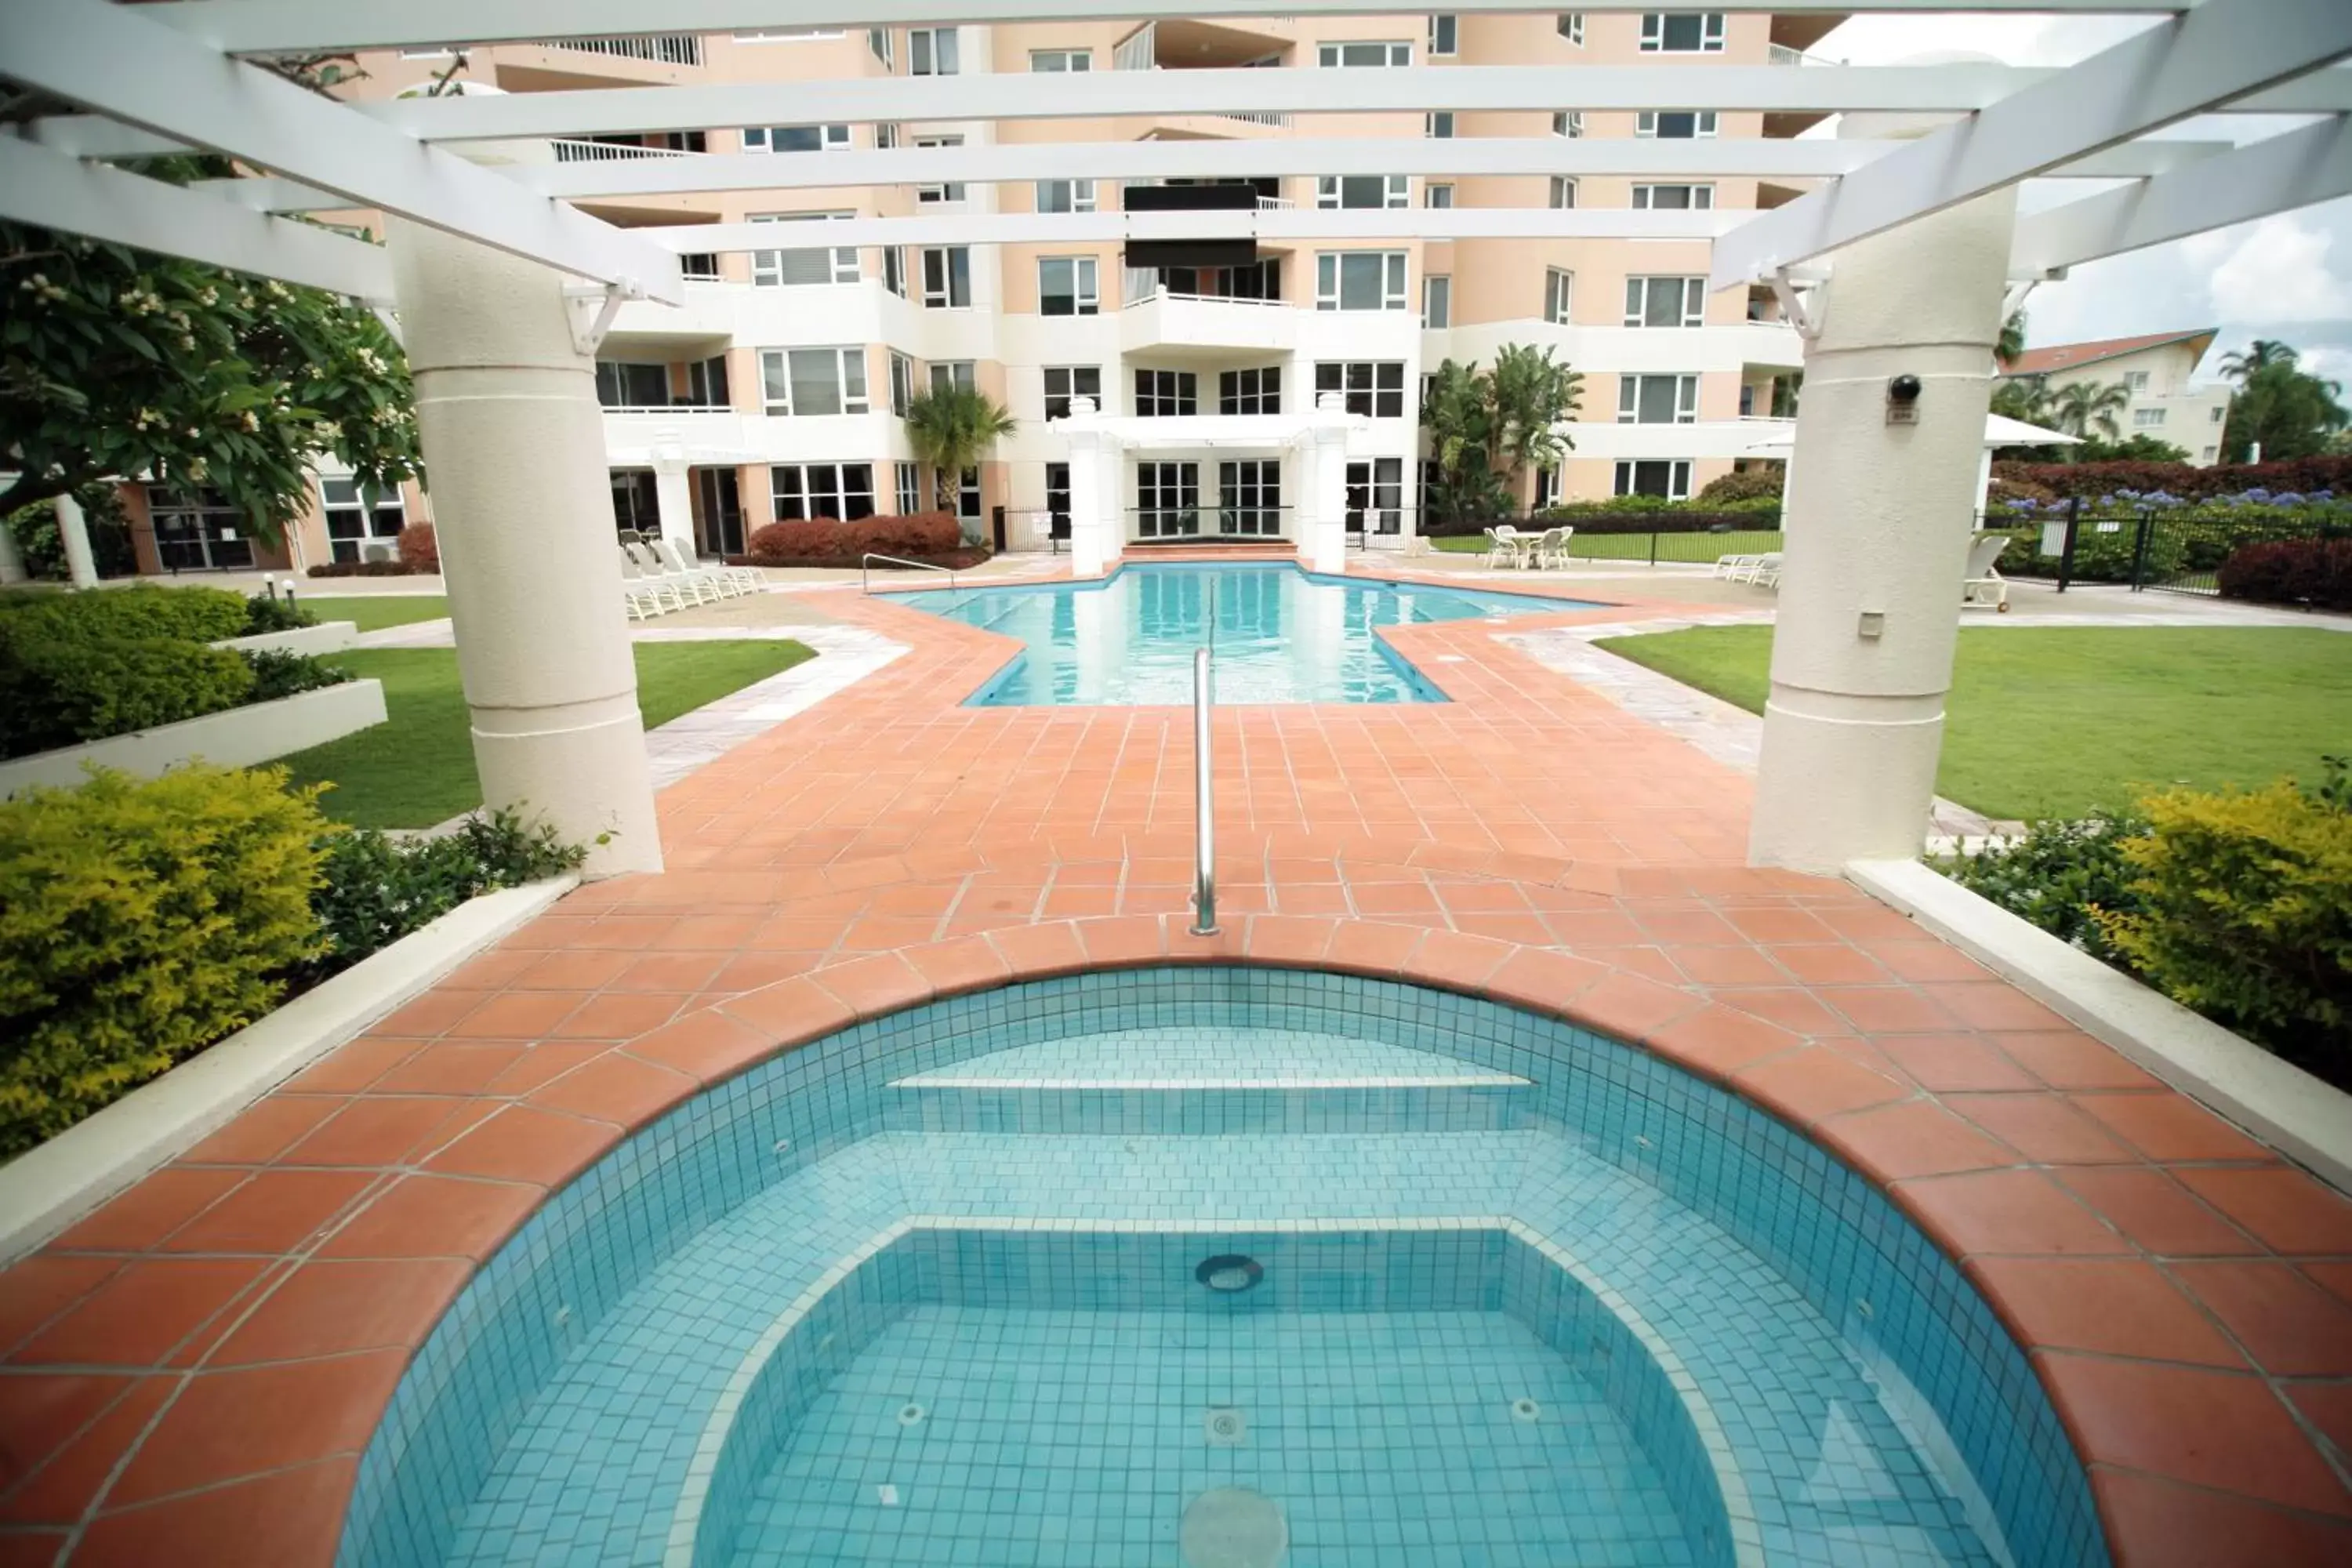 Swimming Pool in Belle Maison Apartments - Official